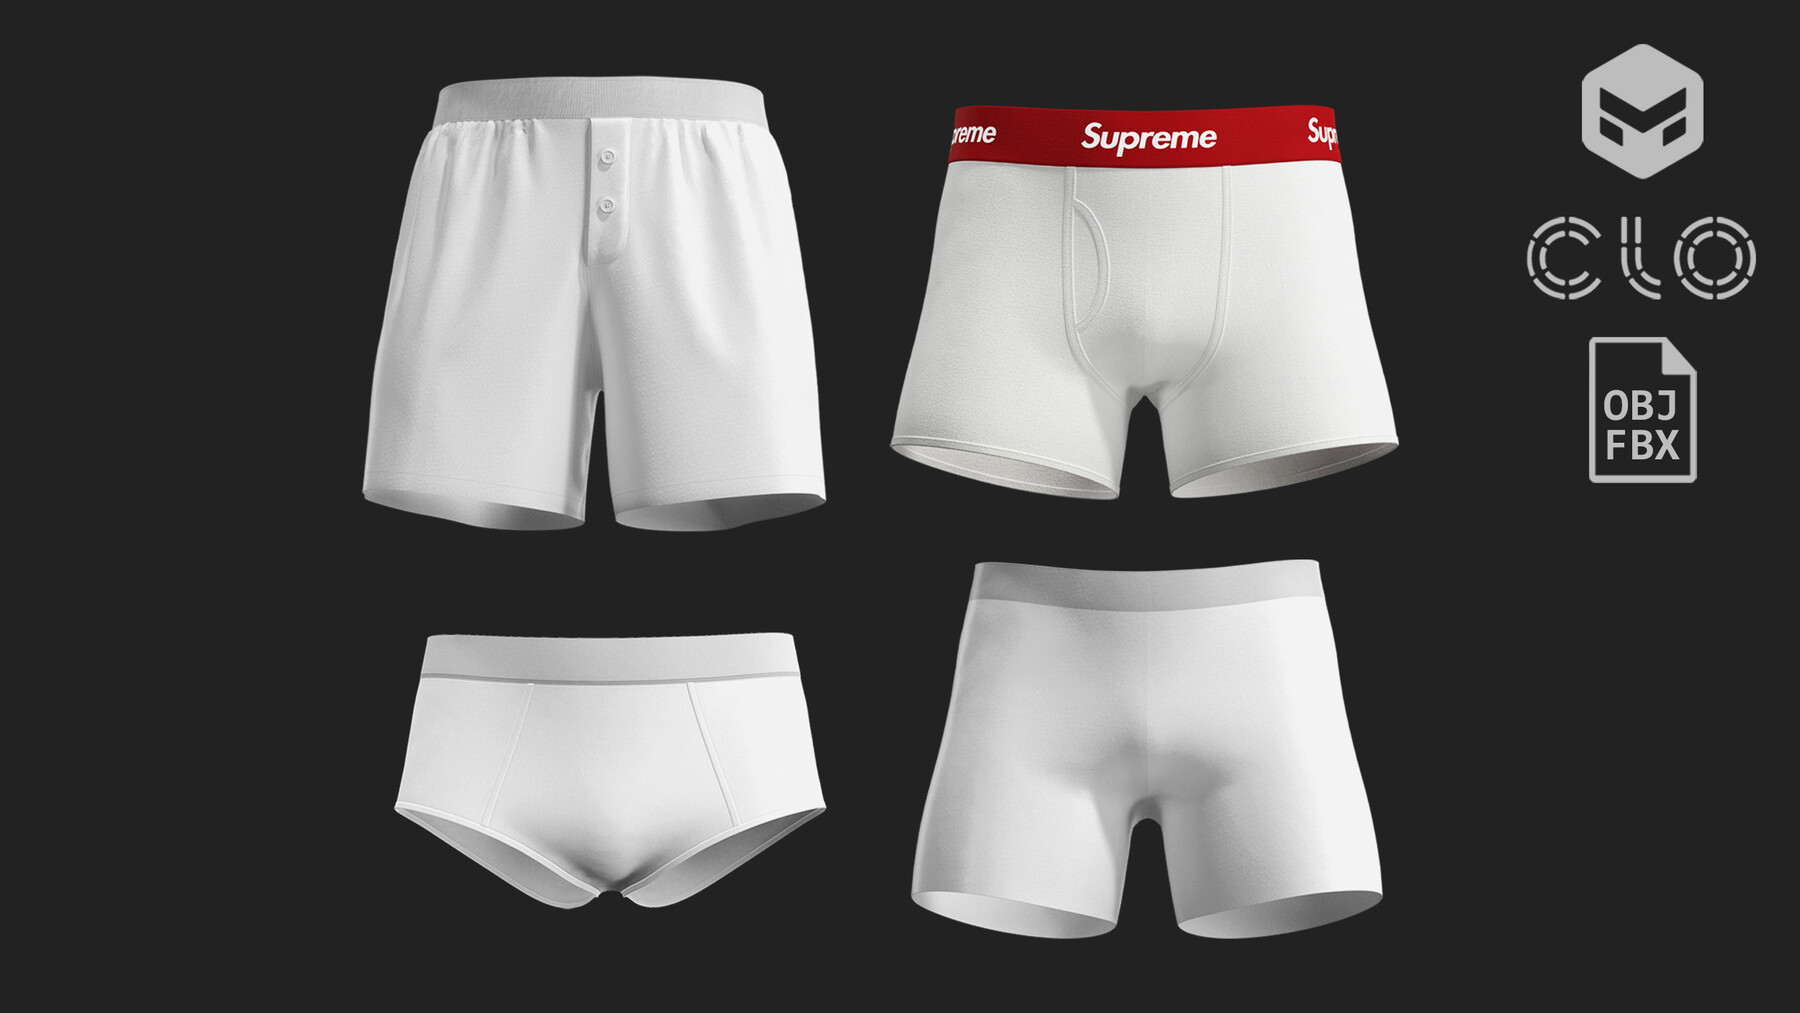 806 Skinny Male Underwear Images, Stock Photos, 3D objects